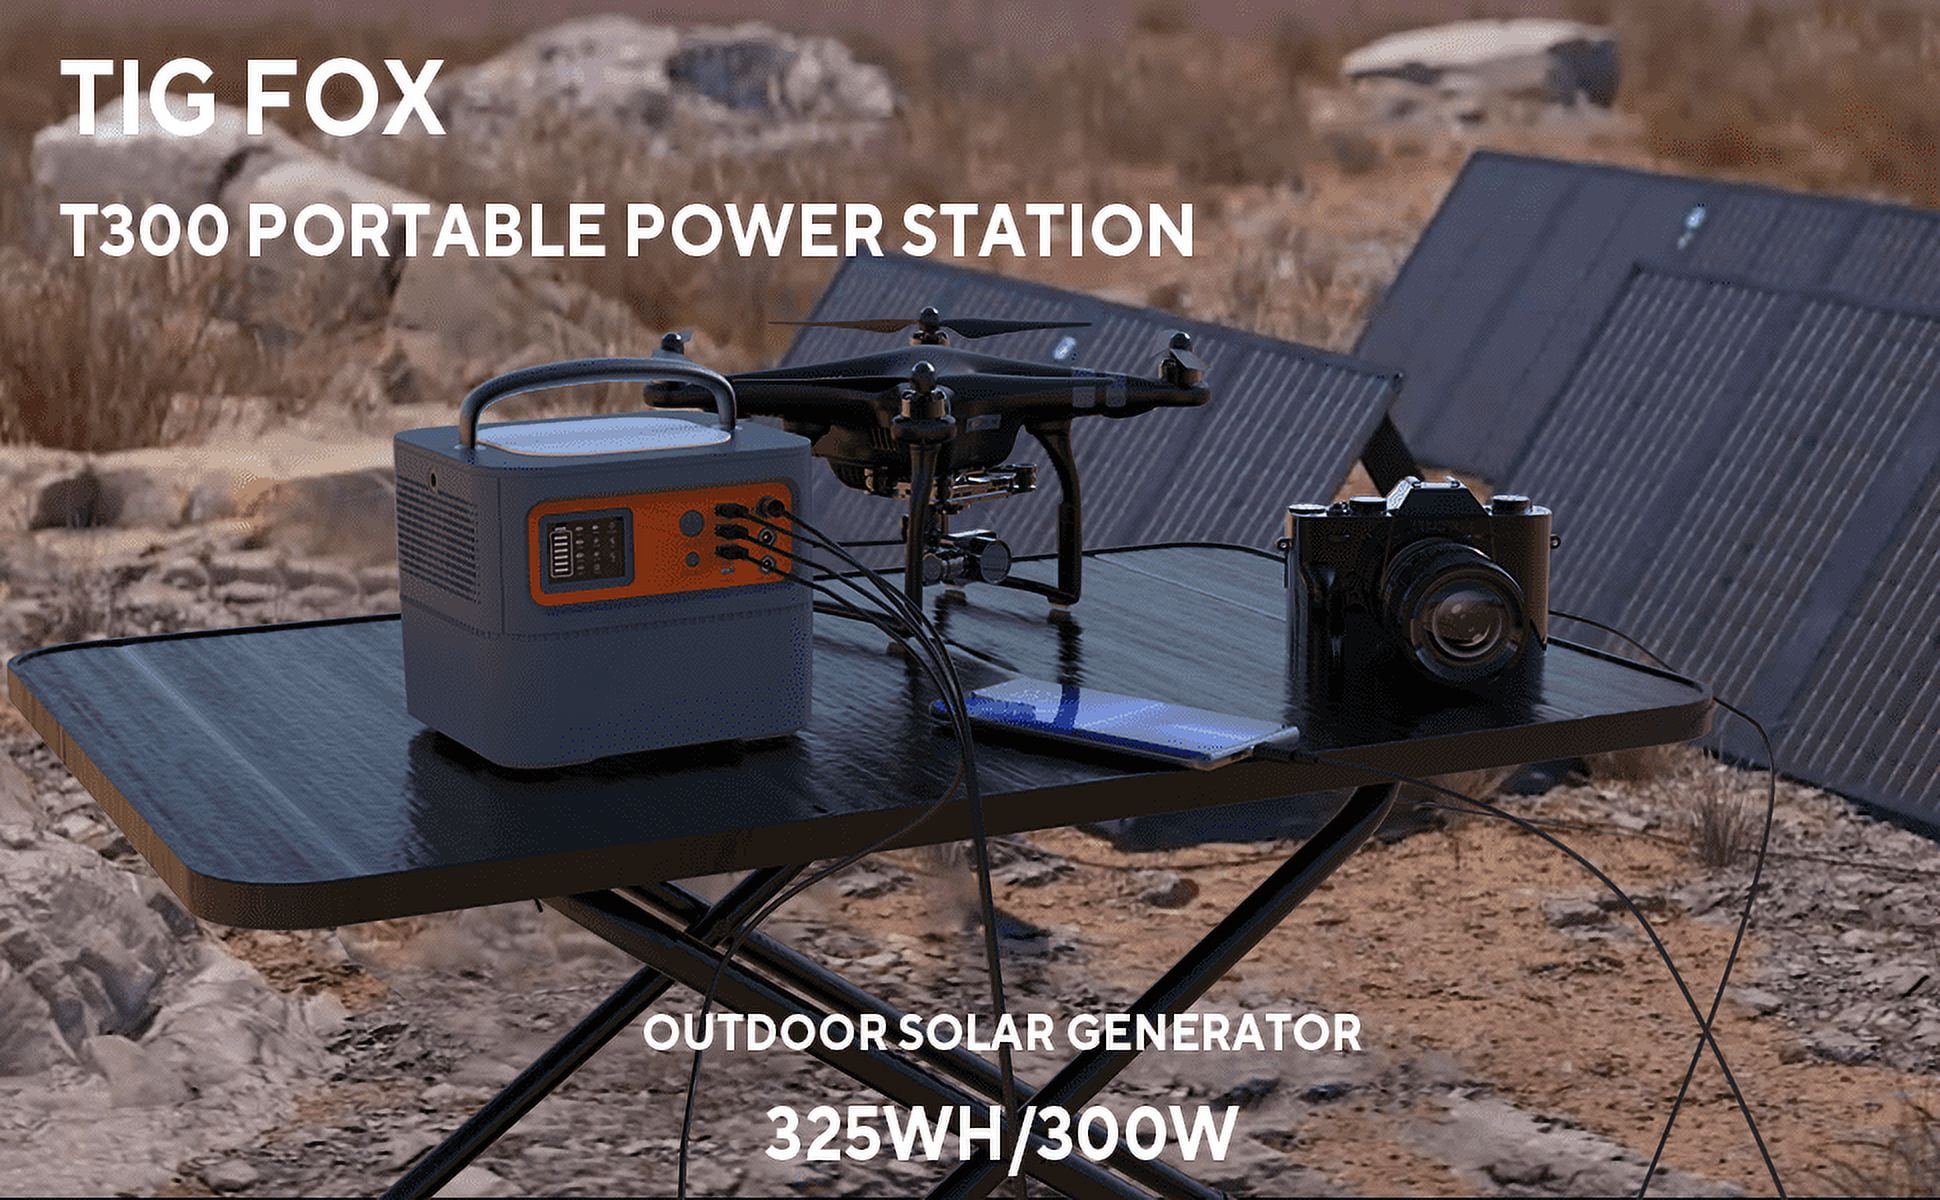 Tig Fox T300, 300w/325Wh,Portable Power Station for Outdoor Solar  Generator, Portable Power Supply for Camping, Backup Battery Pack,  Emergency Home